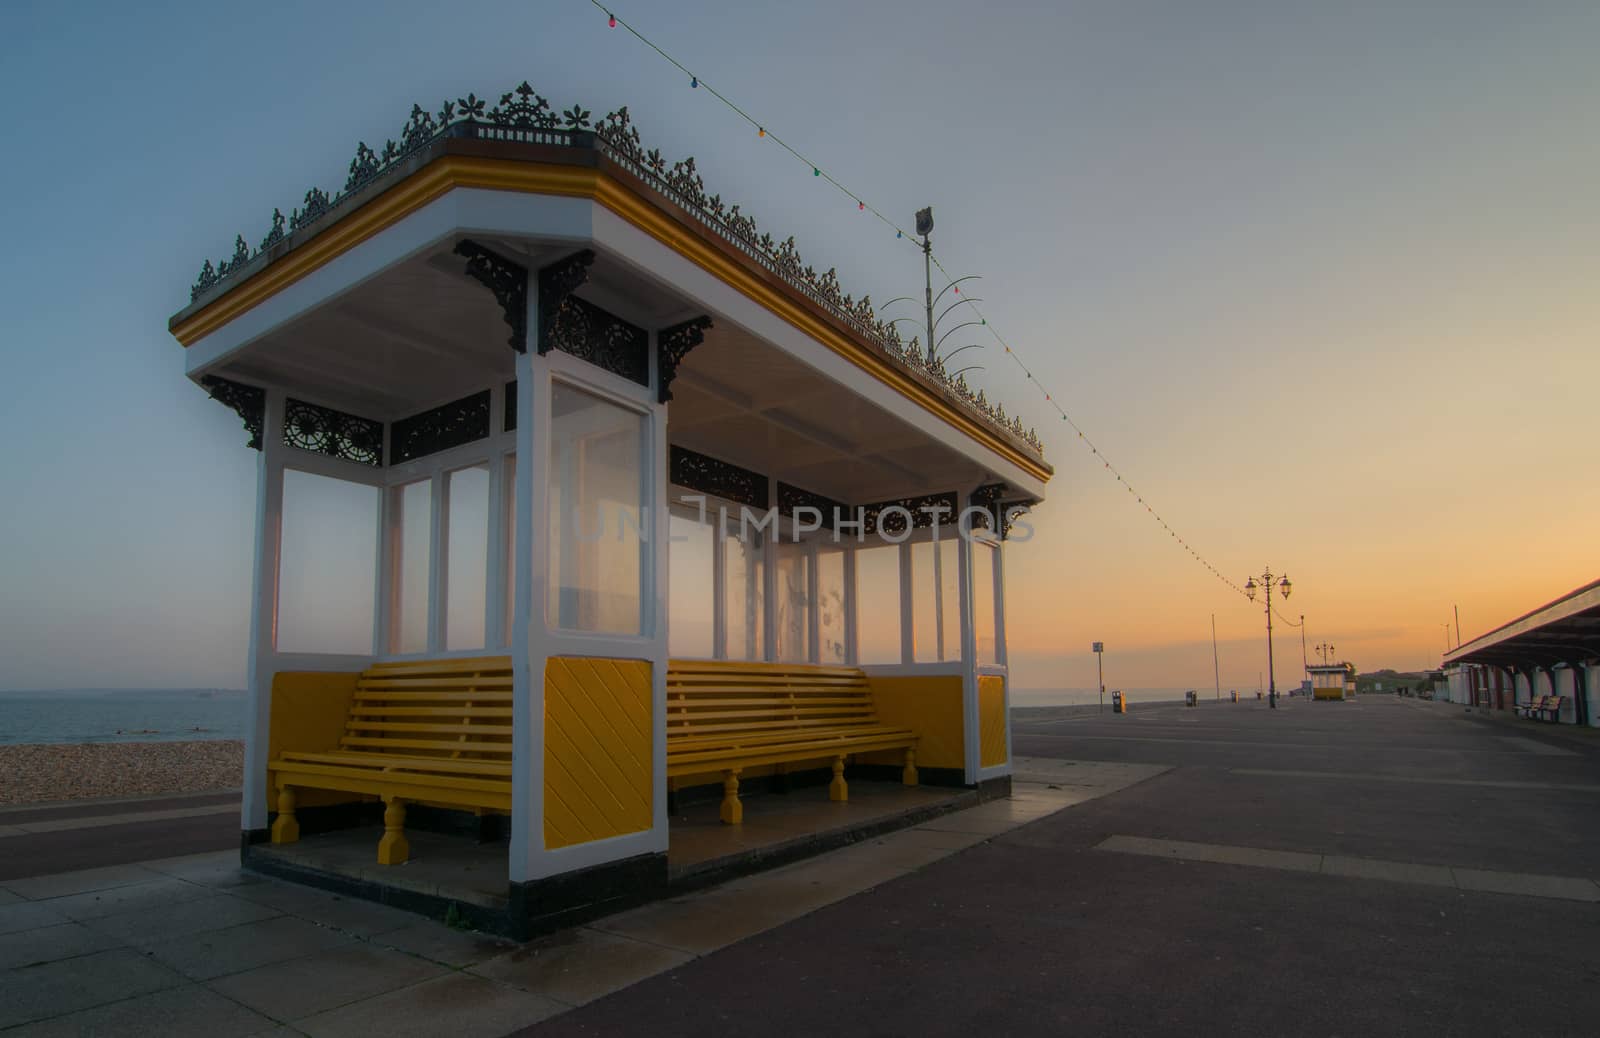 UK beach front shelter at sunset by gary_parker